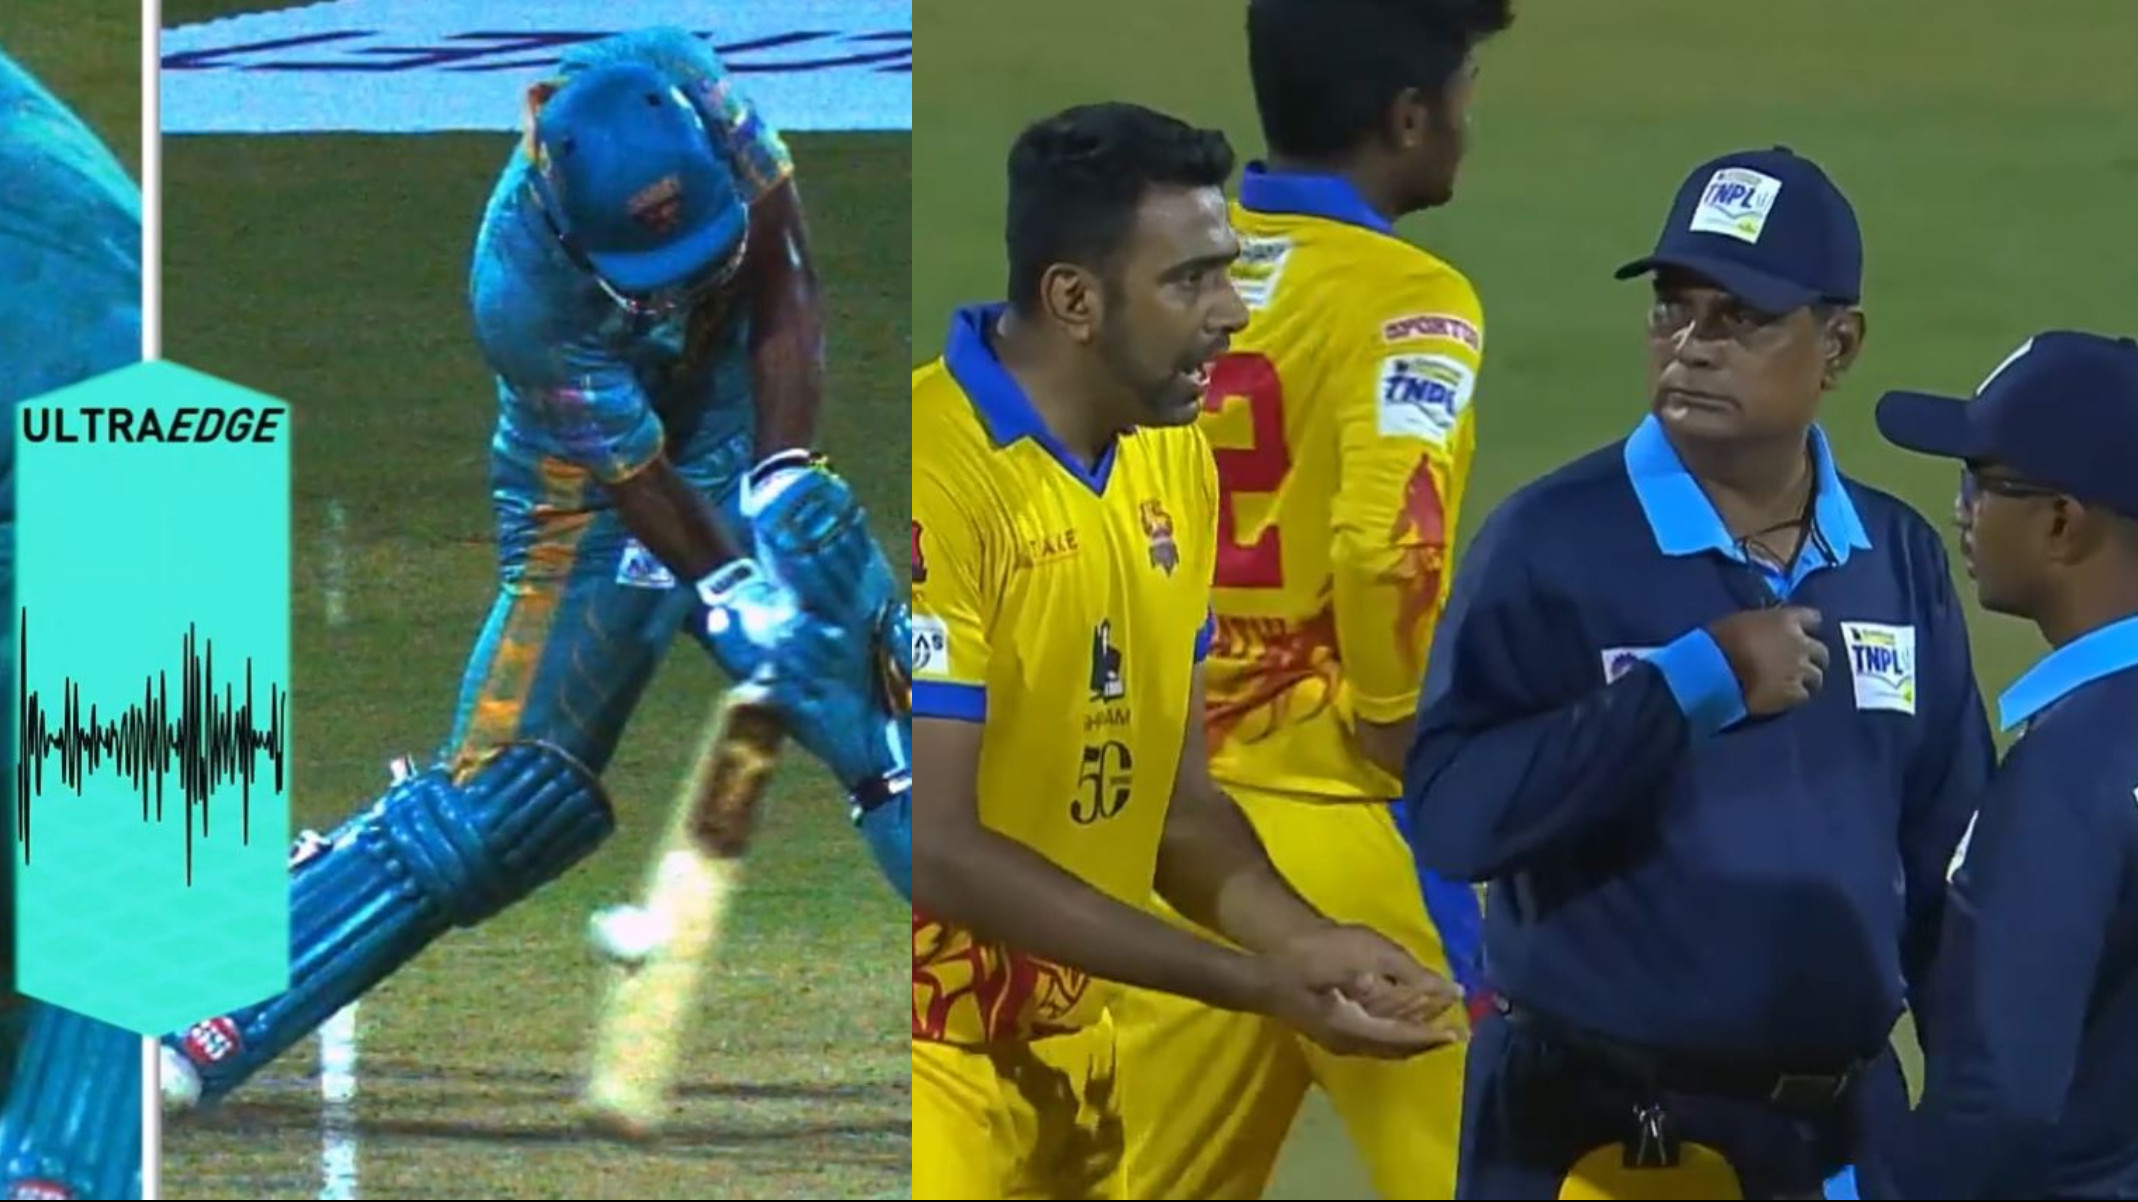 TNPL 2023: WATCH- R Ashwin argues with umpires over dismissal; counter reviews to overturn batter’s initial review